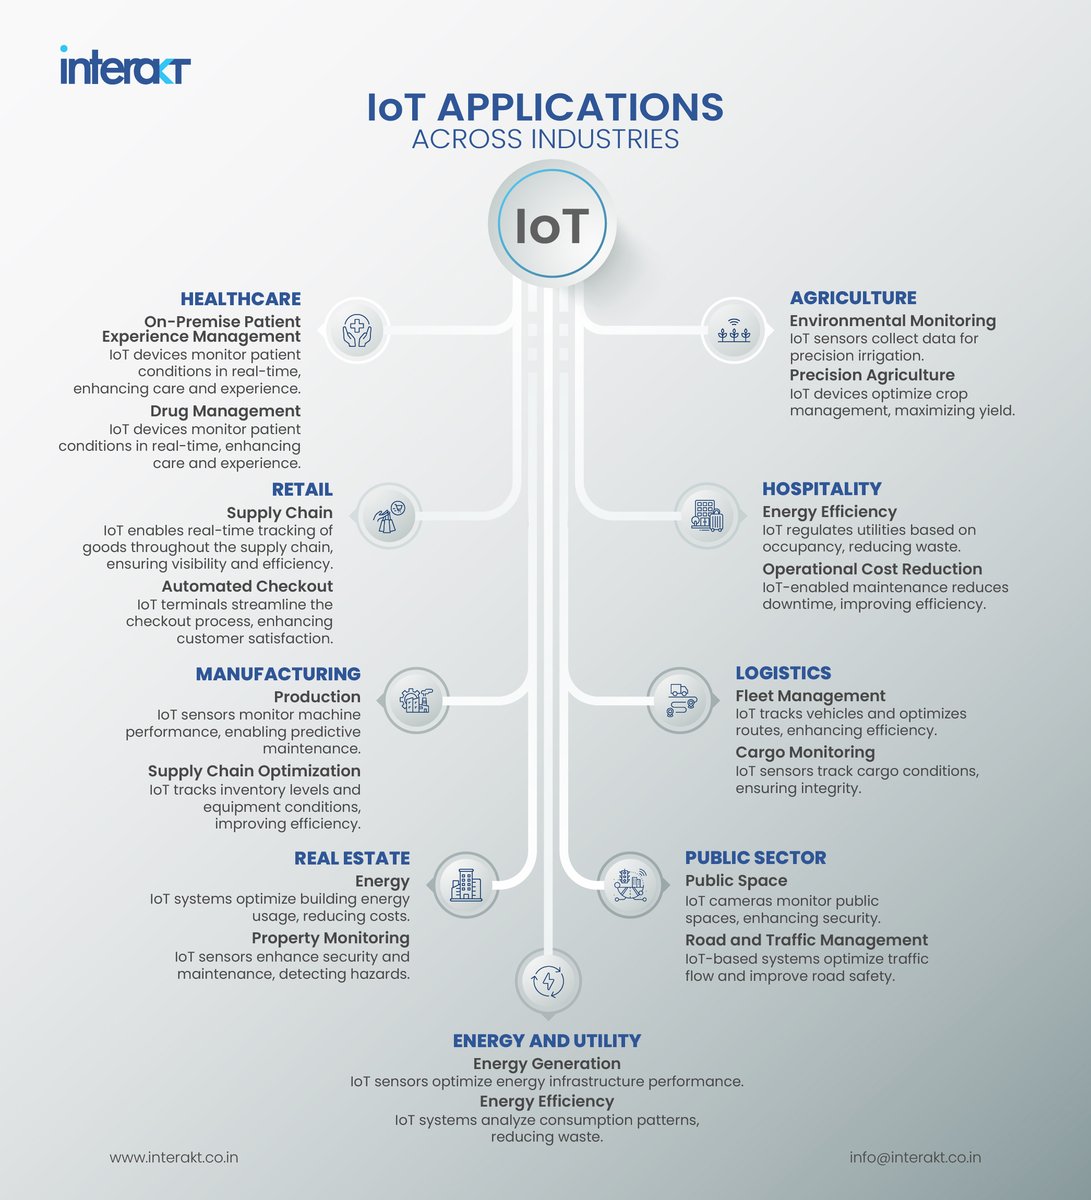 The Internet of Things (IoT) presents a wealth of opportunities to automate processes in various sectors, #revolutionizing both business operations and daily life.
Let's explore some of the most popular use cases and application examples of IoT.